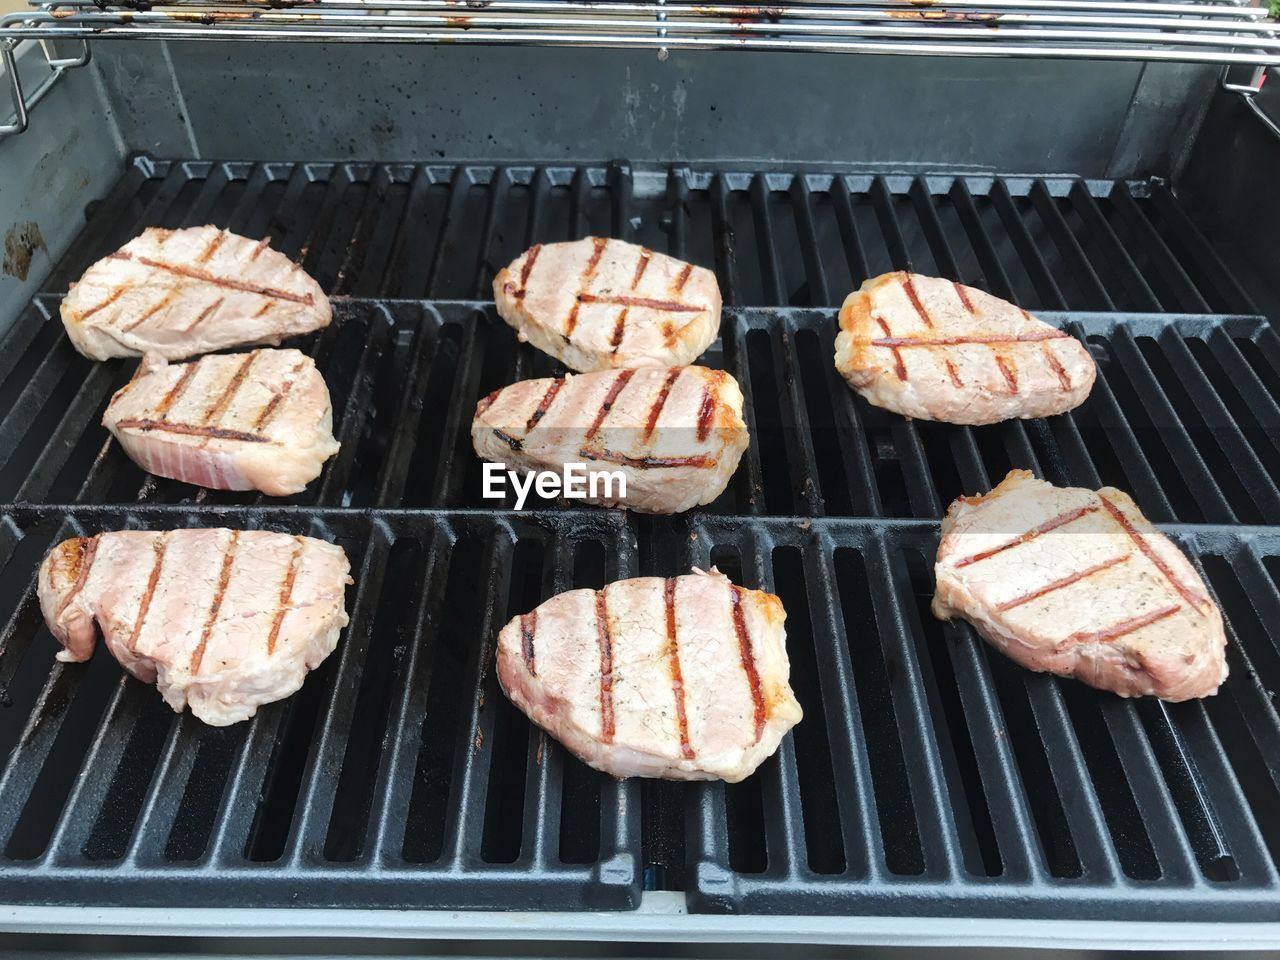 HIGH ANGLE VIEW OF MEAT COOKING ON GRILL